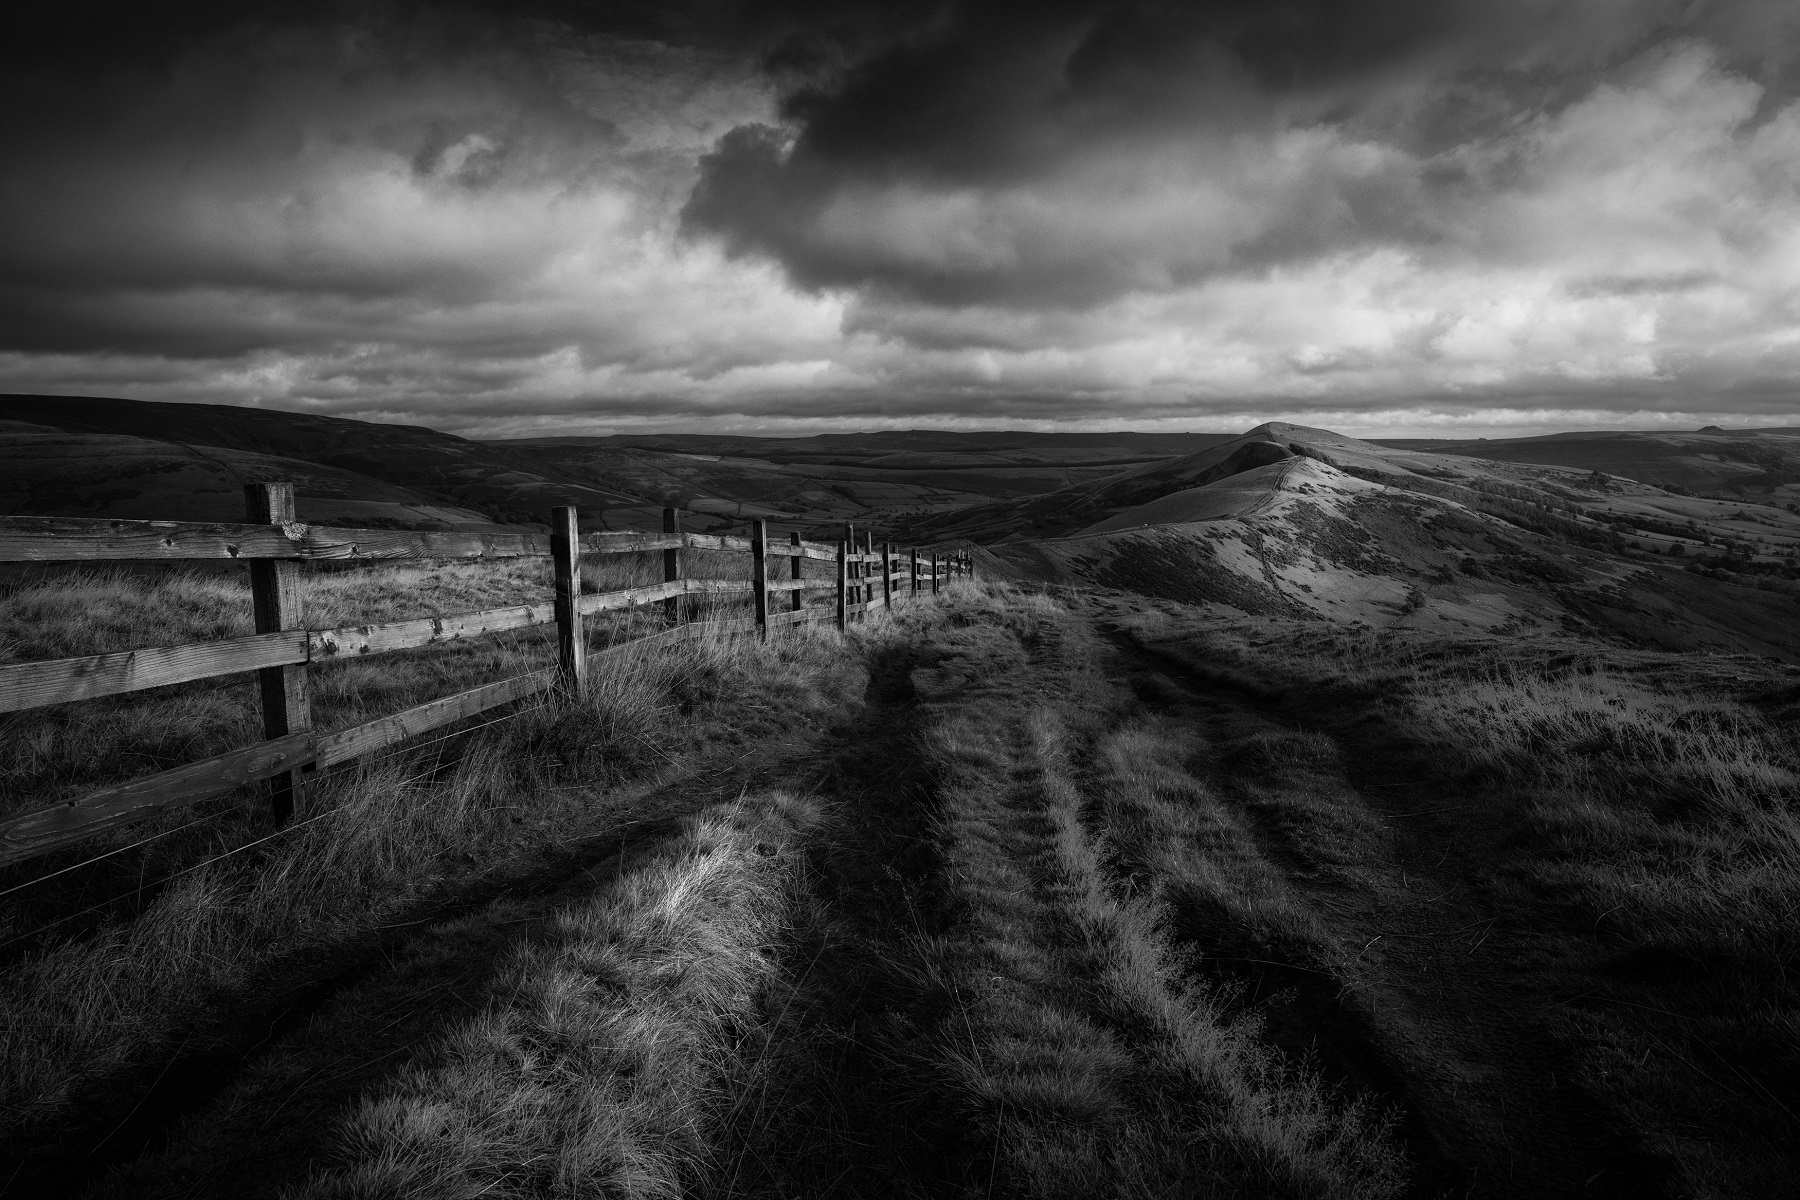 Black and White Photo Awards 2022 Landscape bronze Mention - Andy Gray - The famous Great Ridge walkway in the Peak District England